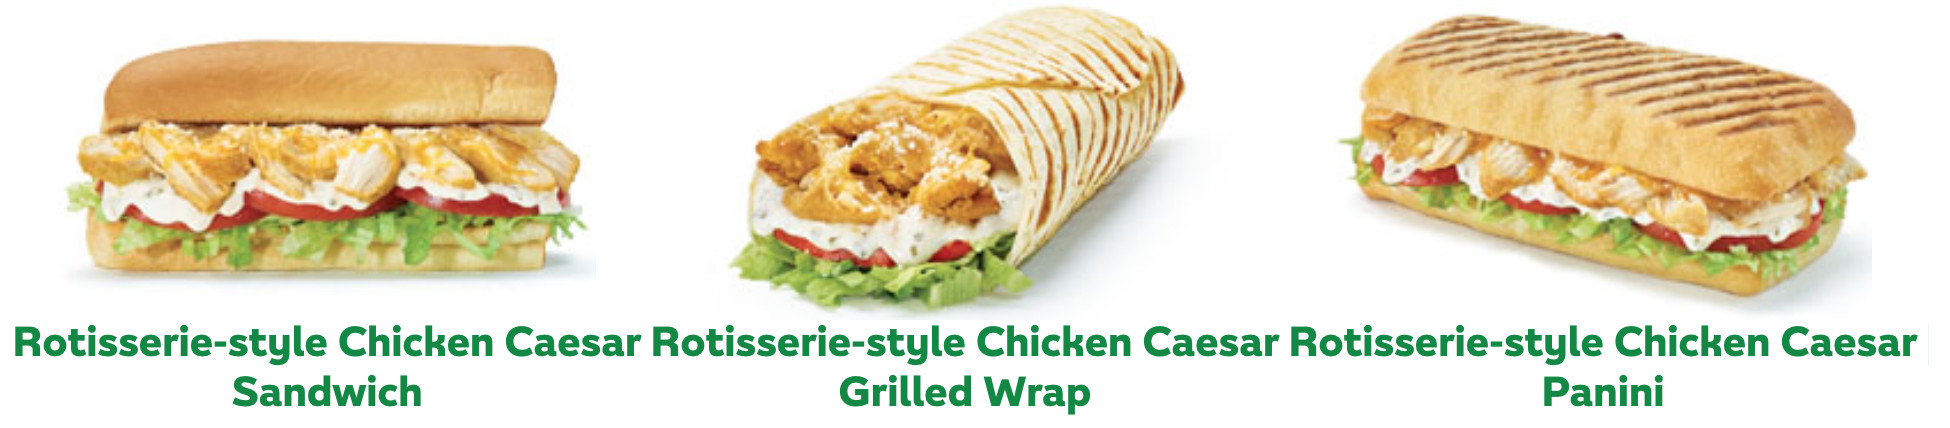 Subway Gluten Free Bread Locations
 Subway Canada Gluten Free Bread Now Available New